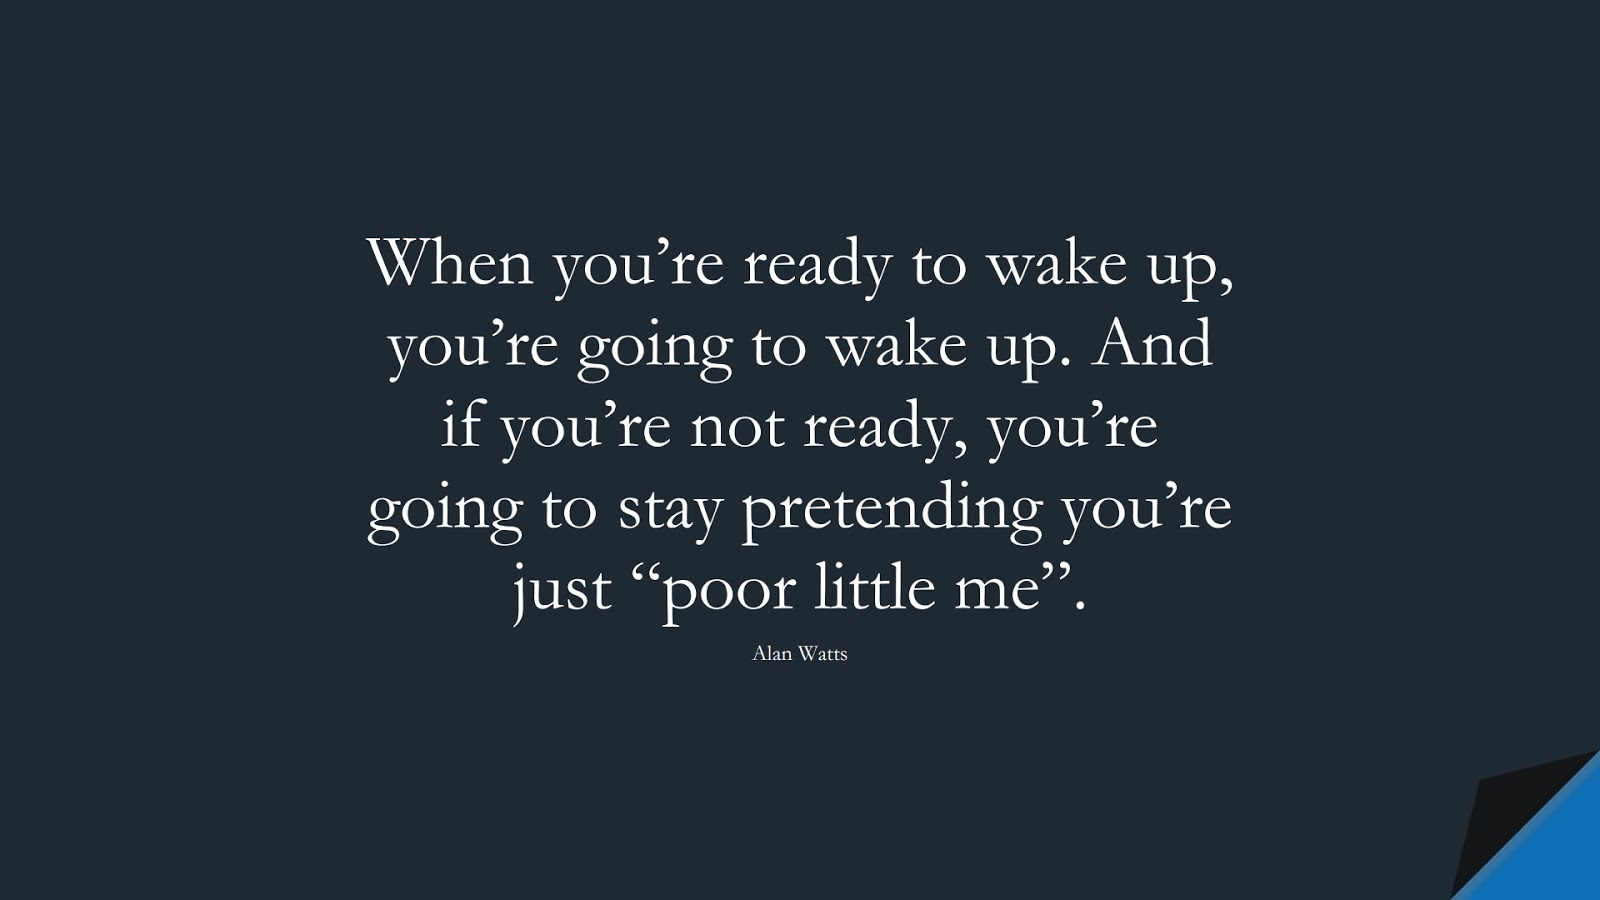 When you’re ready to wake up, you’re going to wake up. And if you’re not ready, you’re going to stay pretending you’re just “poor little me”. (Alan Watts);  #DepressionQuotes